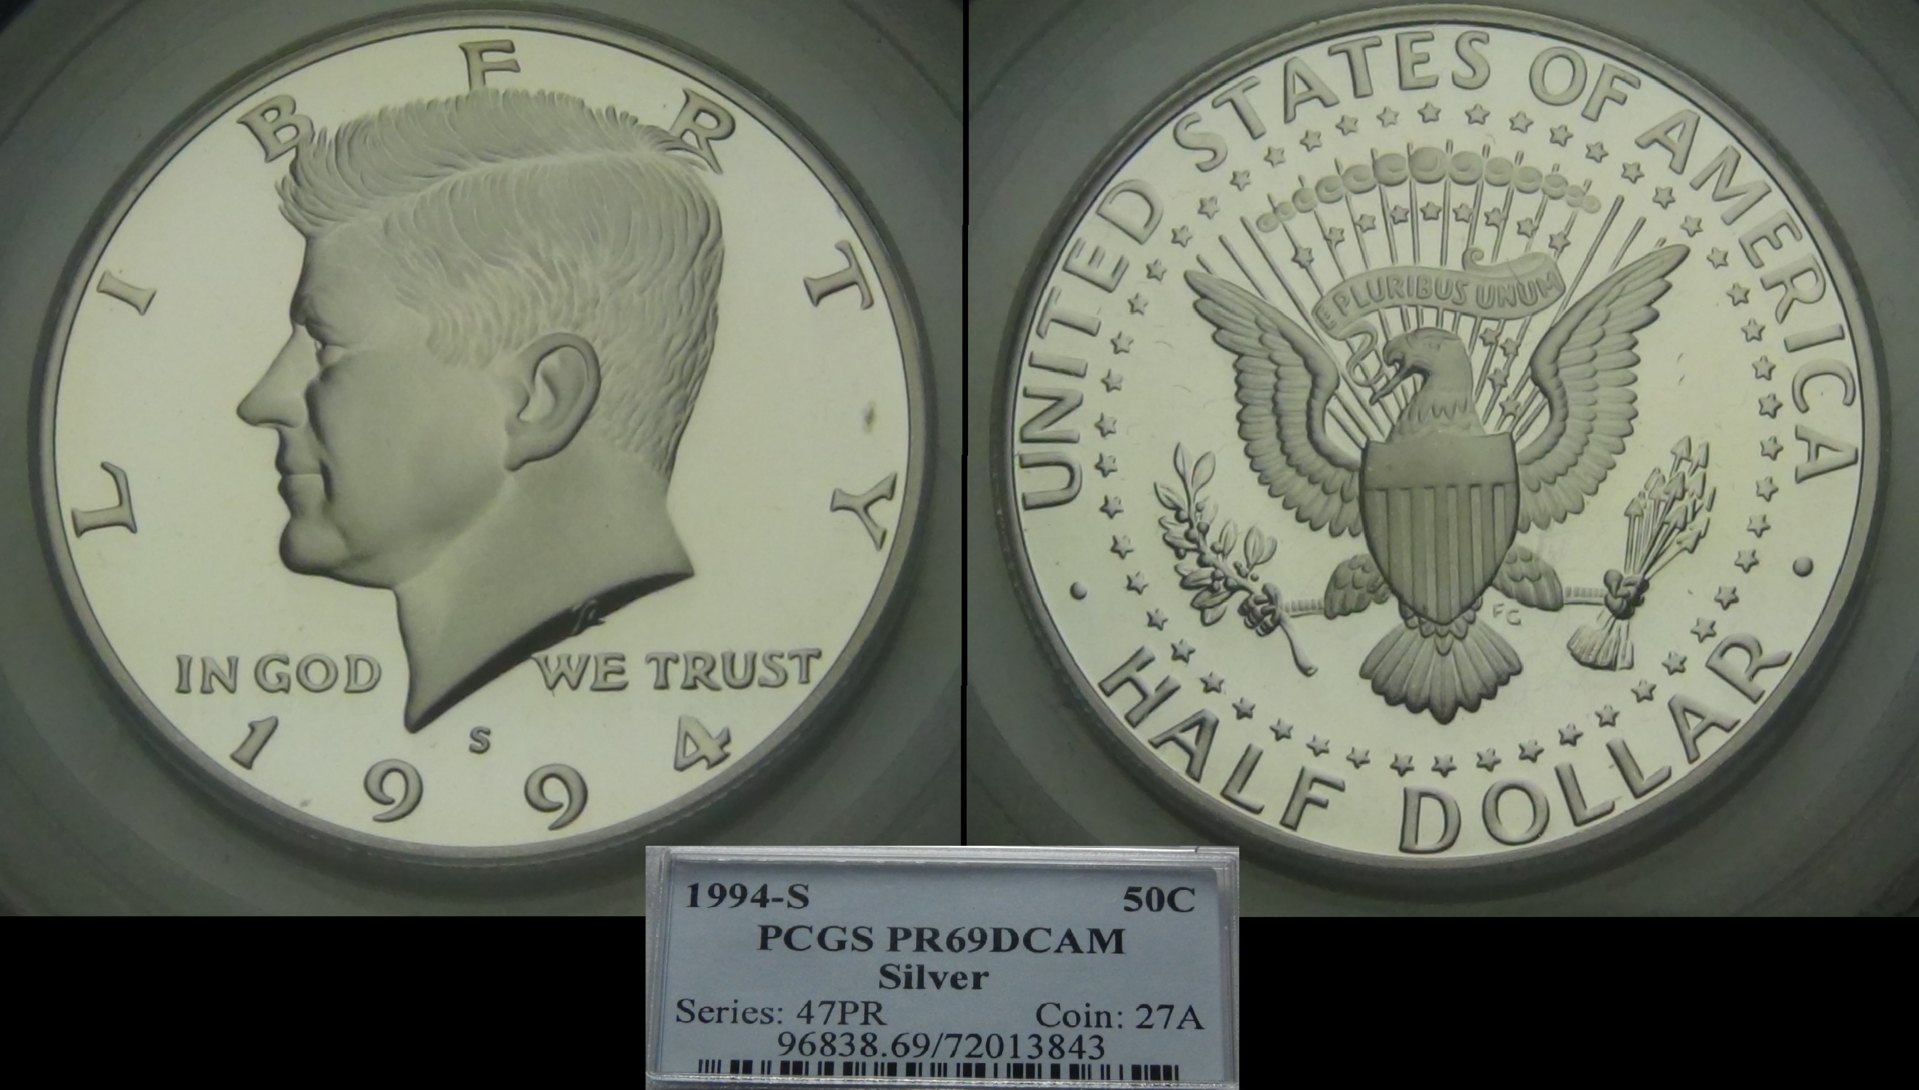 94-s pcgs silver.png